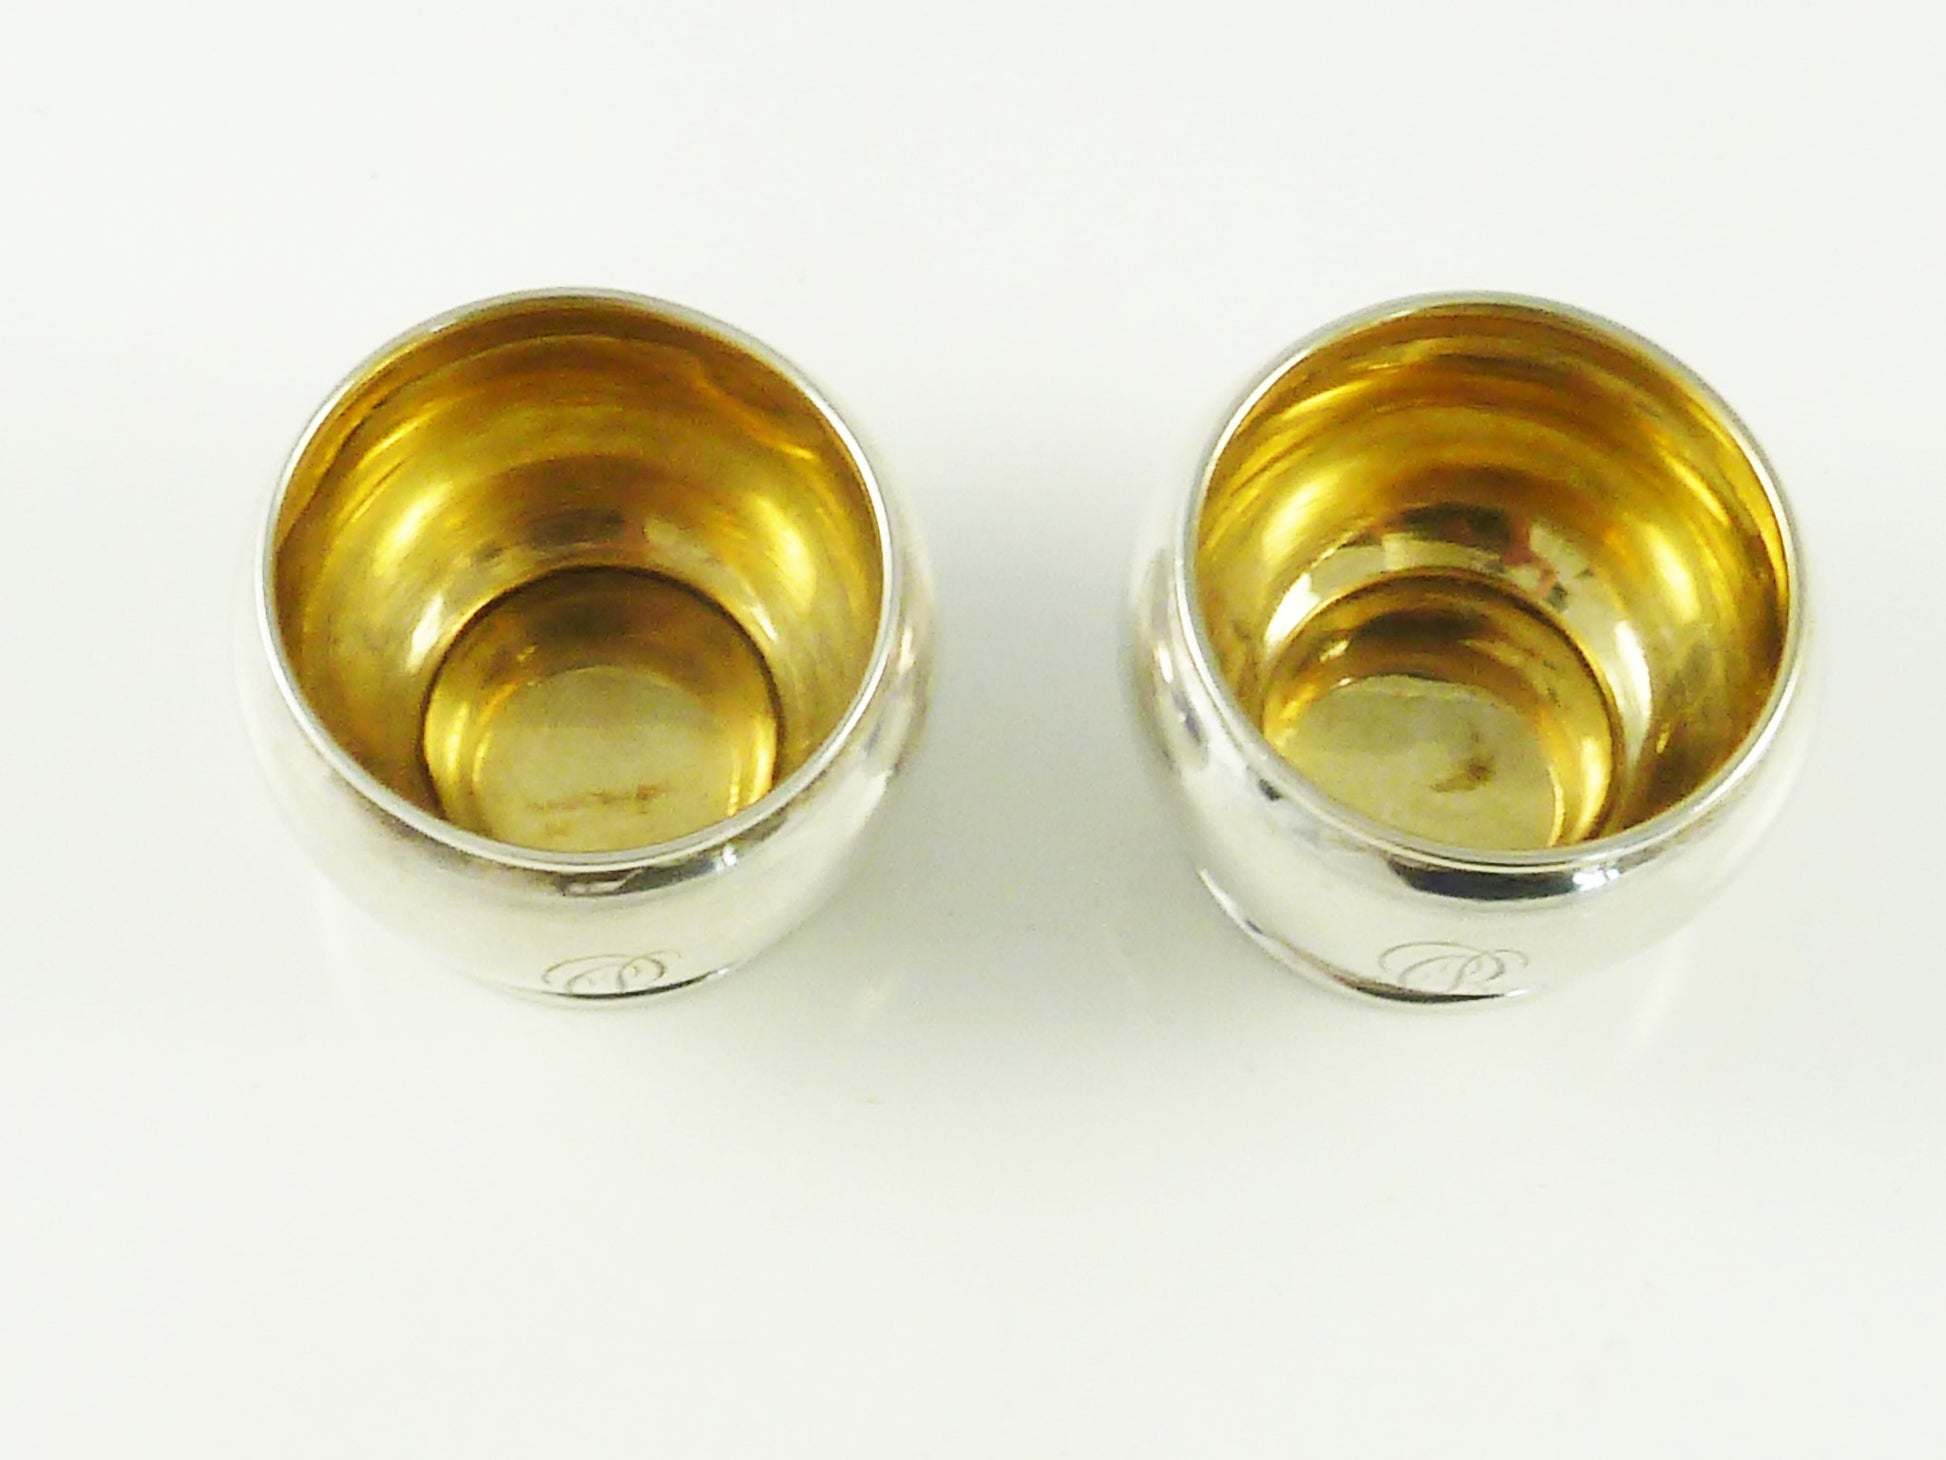 Antique Sterling Silver Salt Cellars a Pair,  Tiffany & Co - 43 Chesapeake Court Antiques